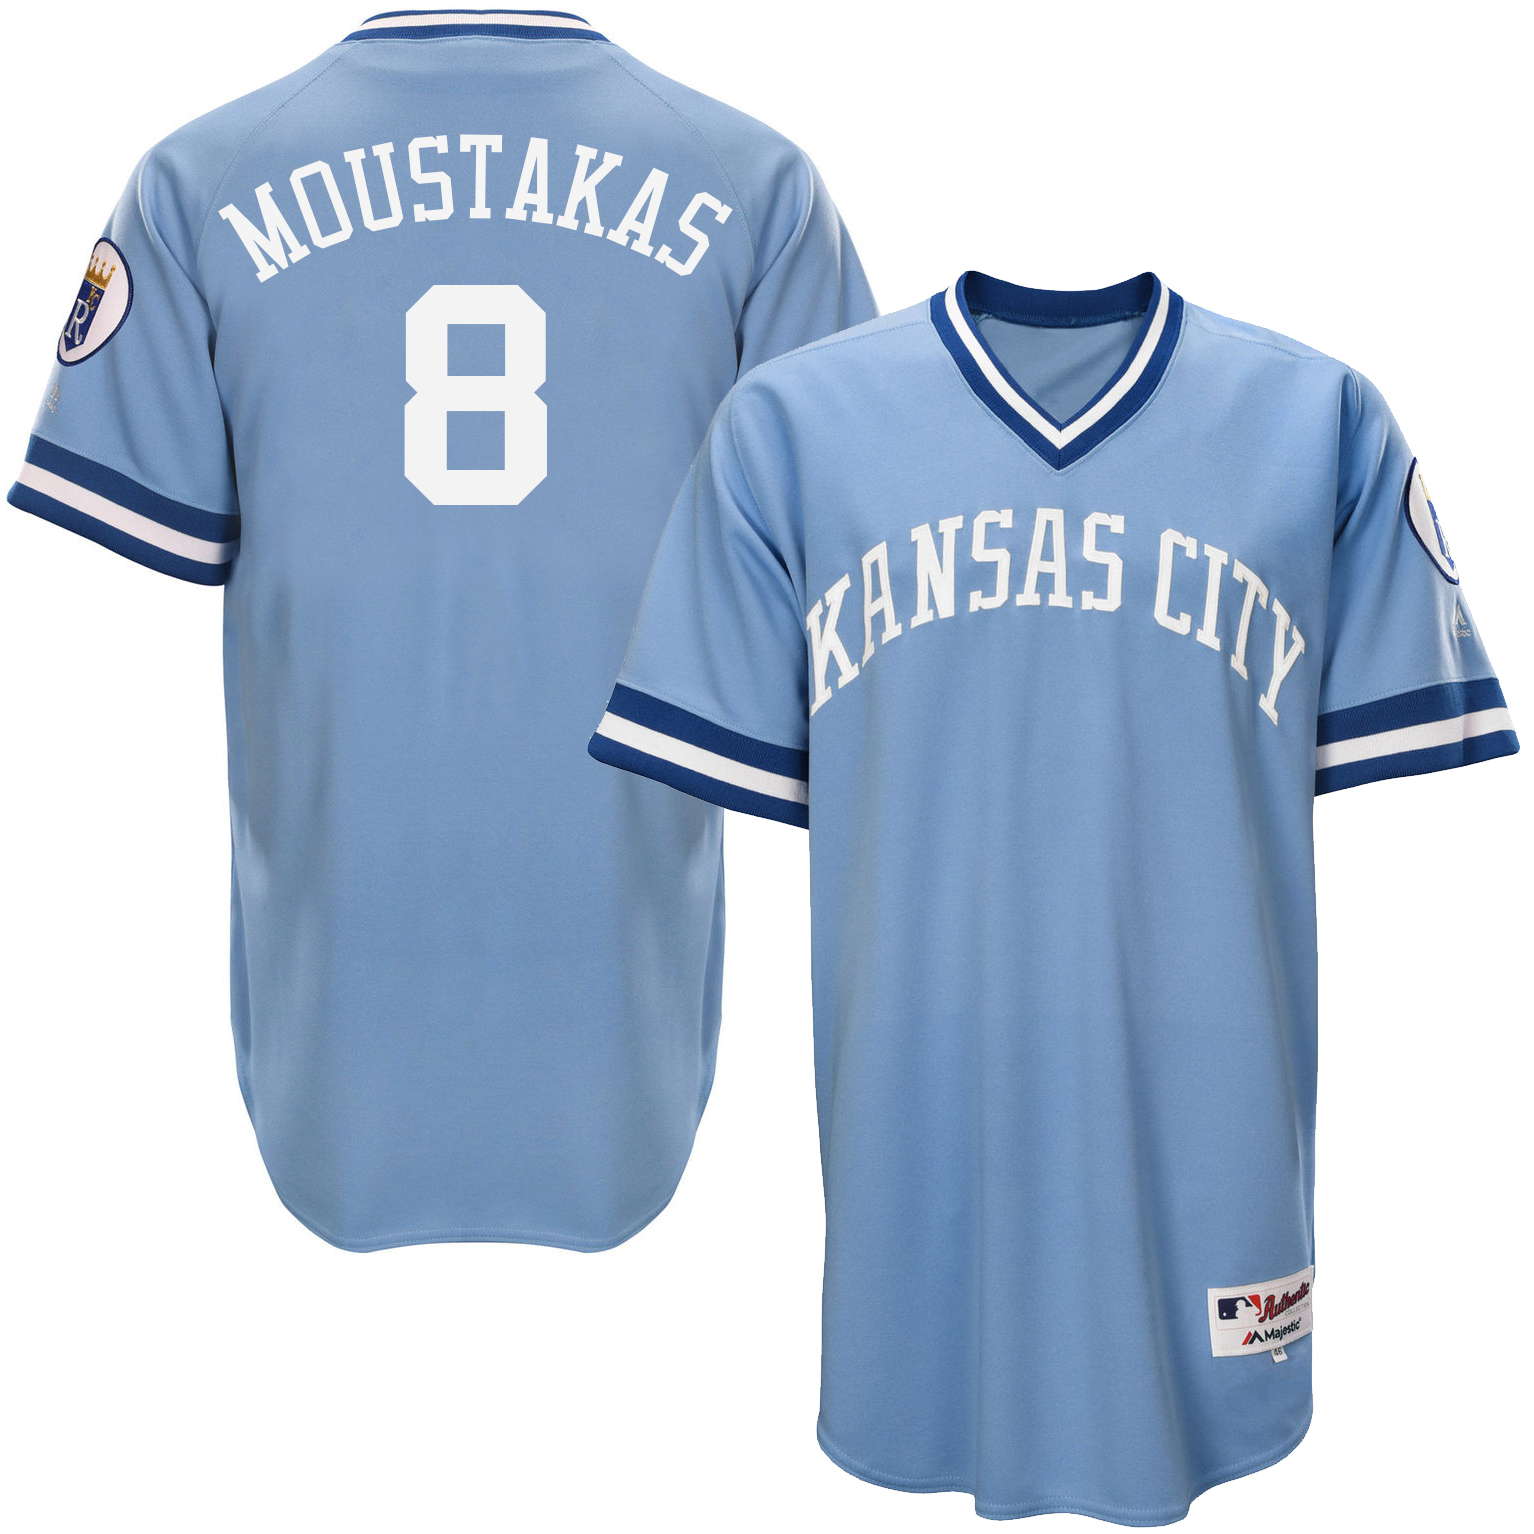 Royals 8 Mike Moustakas Light Blue Throwback Jersey